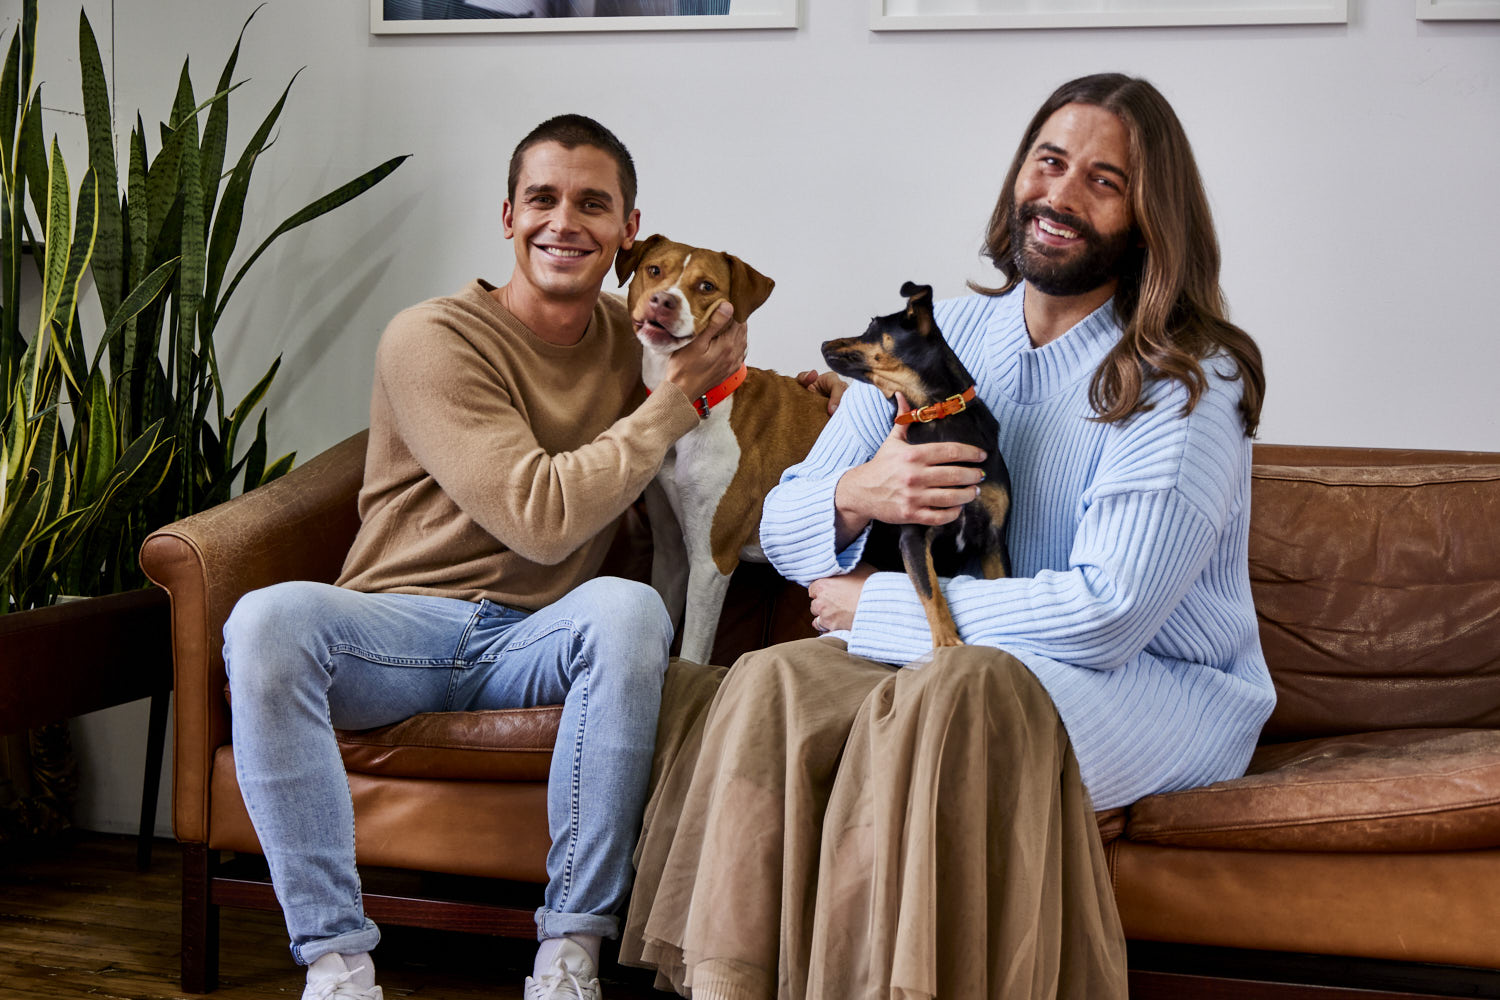 Antoni Porowski and Jonathan Van Ness (“JVN”) sitting on a couch with their dogs